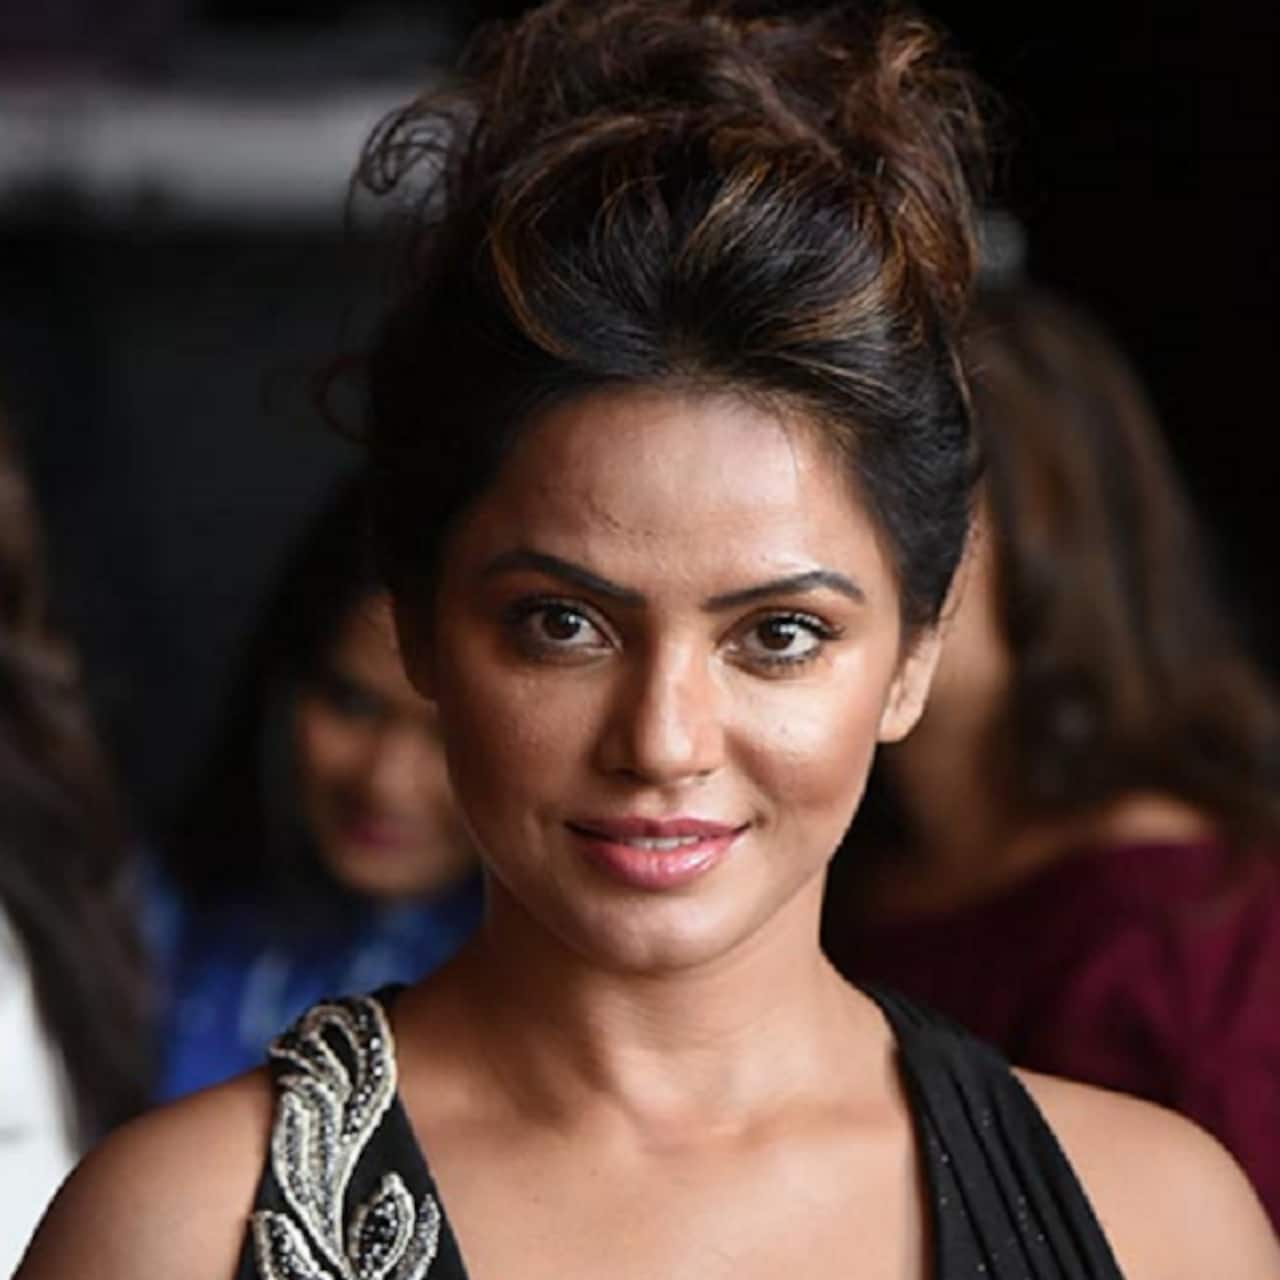 Neetu Chandra reveals she was offered Rs 25 lakh to play a businessman’s salaried wife; talks about being jobless despite working in 13 National Award winning films